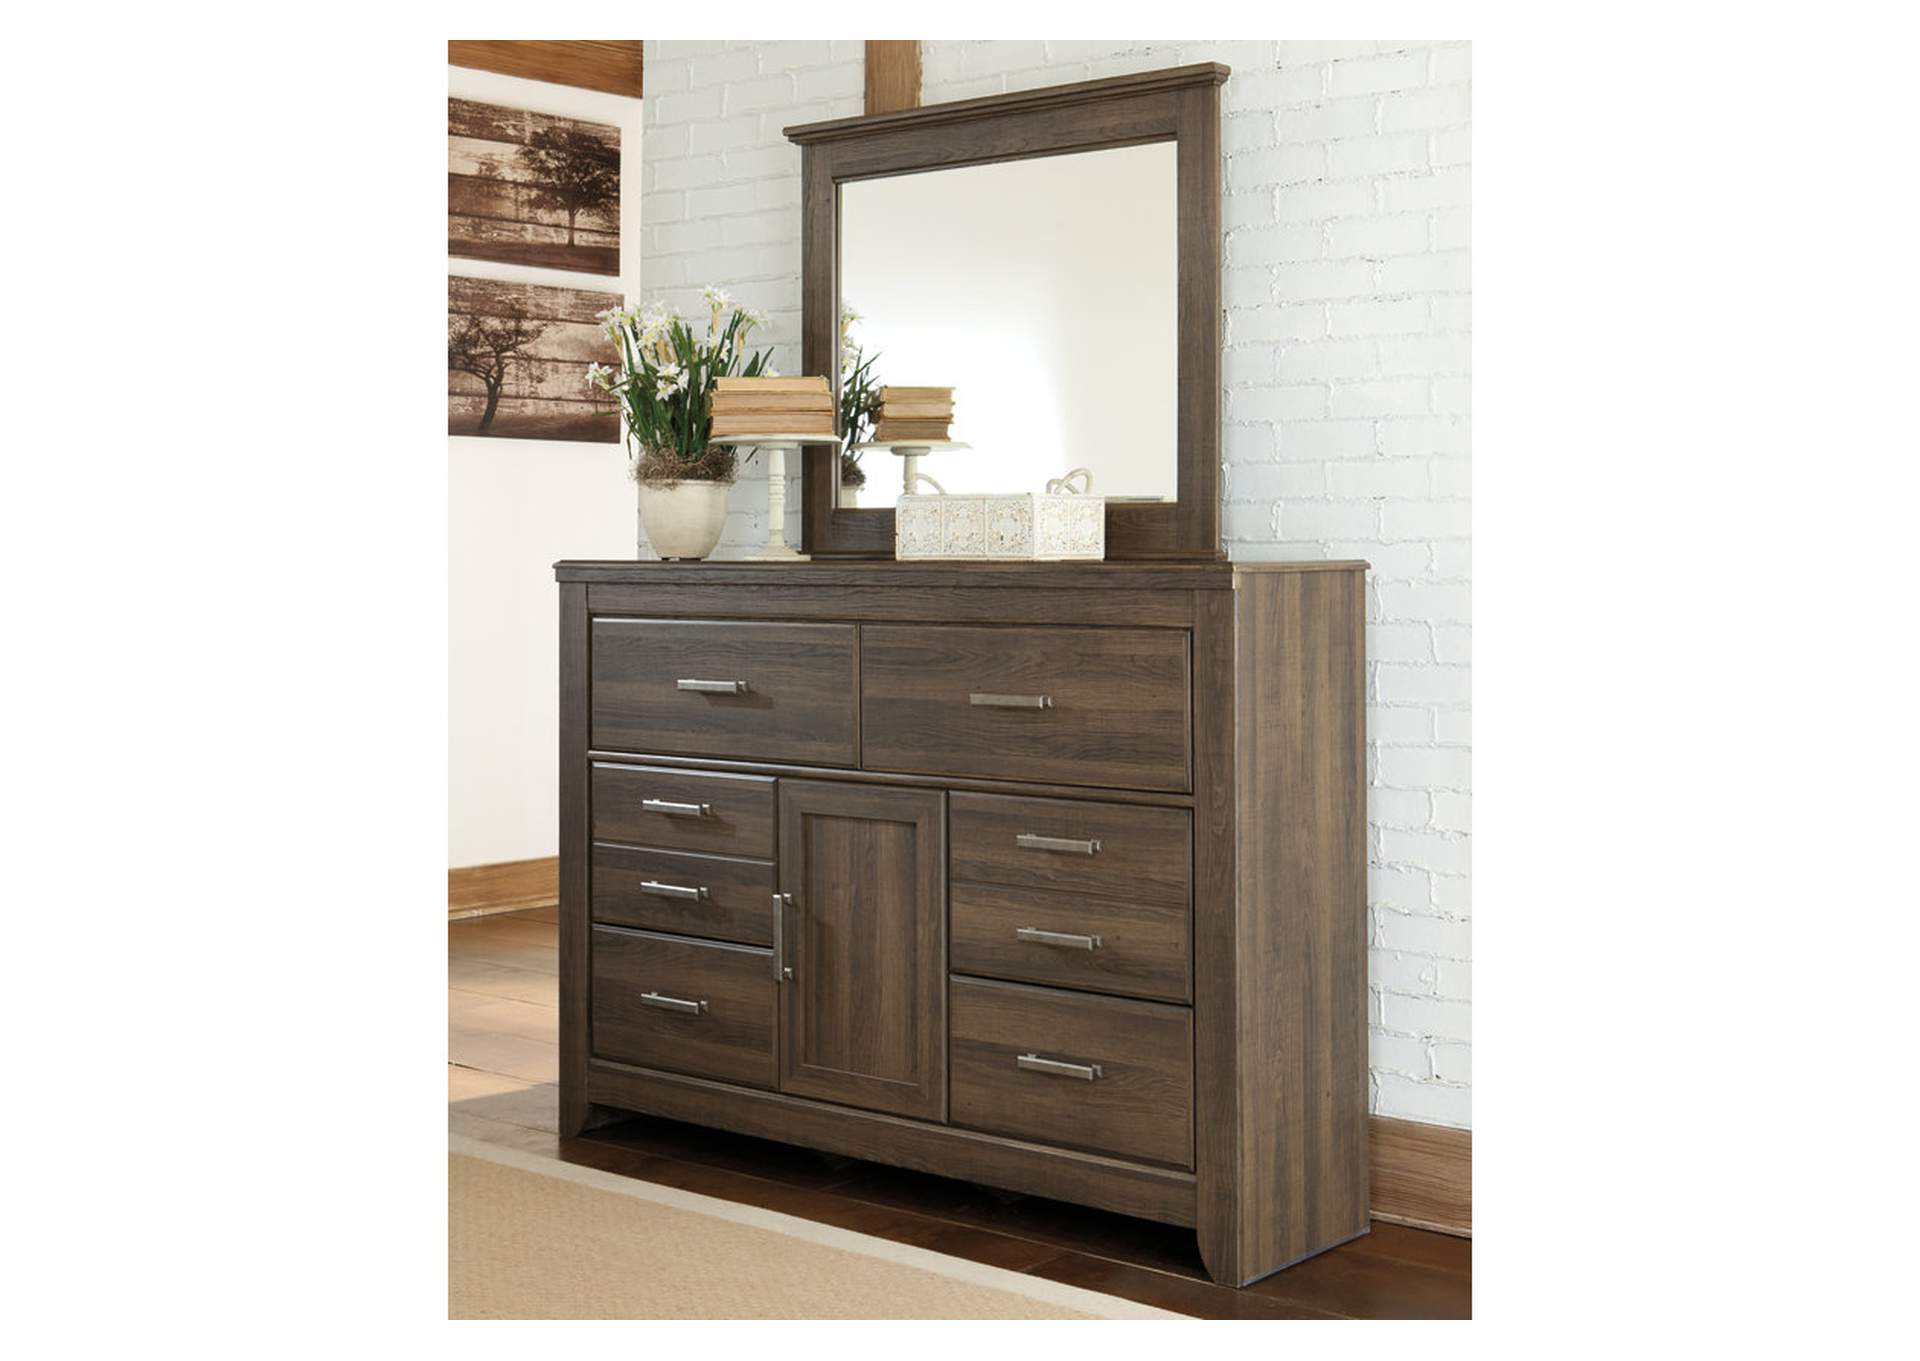 Juararo King Poster Bed with Mirrored Dresser, Chest and Nightstand,Signature Design By Ashley